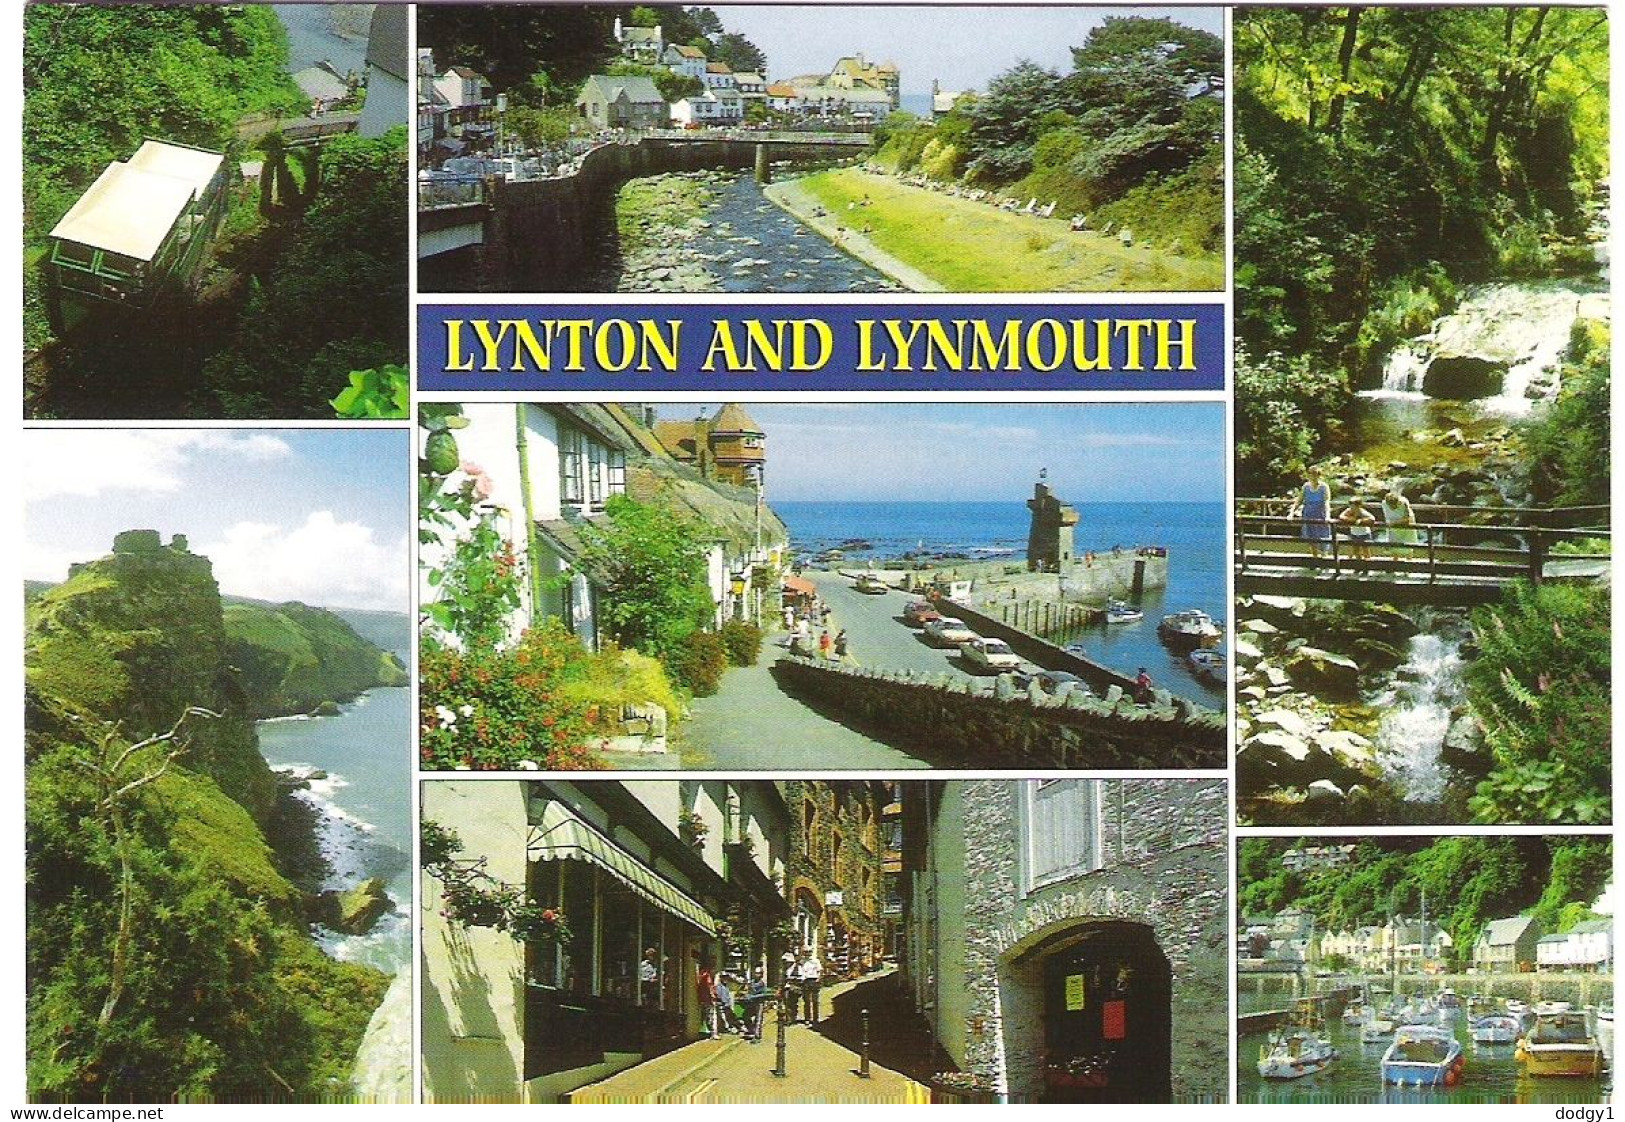 SCENES FROM LYNTON AND LYNMOUTH, NORTH DEVON, ENGLAND. USED POSTCARD Mm8 - Lynmouth & Lynton